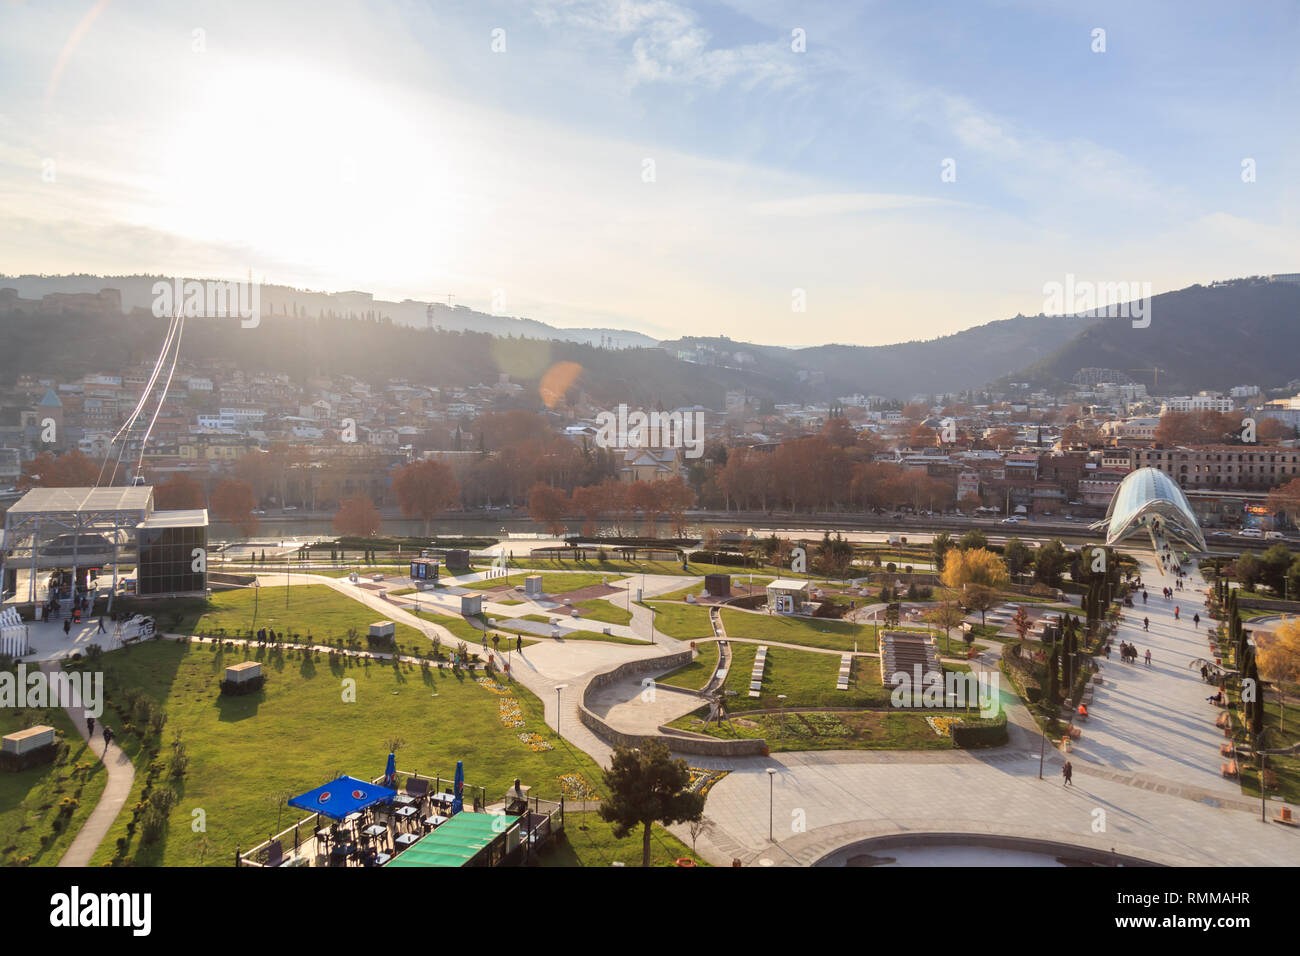 Panoramic view of Tbilisi city, old town and modern architecture. Tbilisi the capital of Georgia. Stock Photo